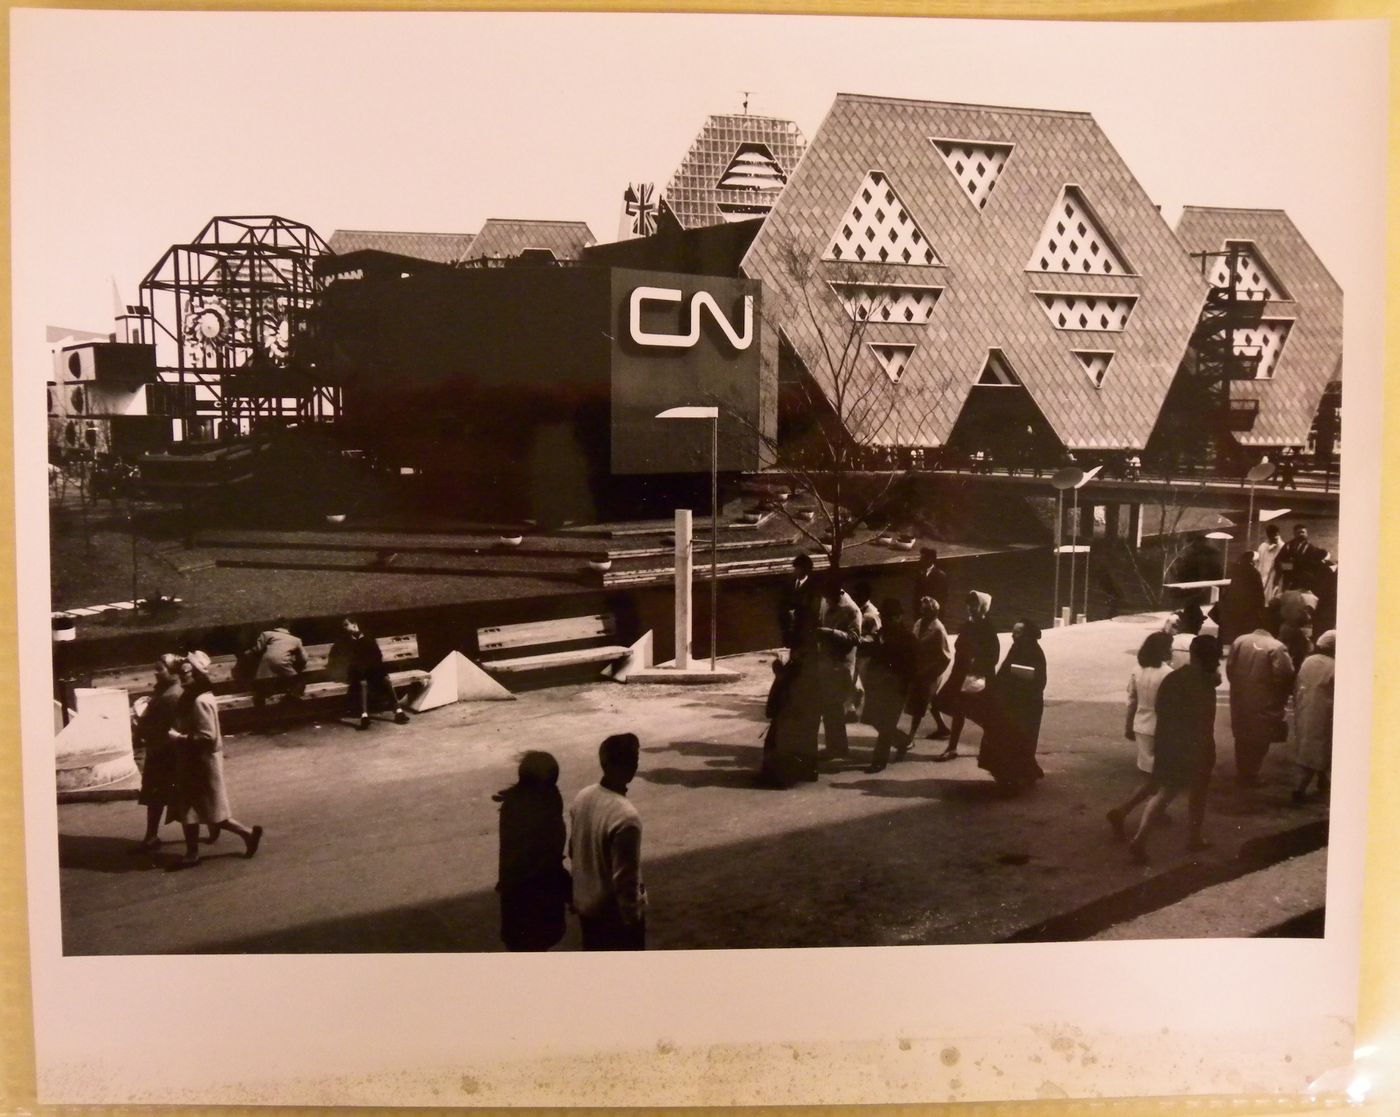 View of the CN Pavilion with the Man the Producer Pavilion in background, Expo 67, Montréal, Québec